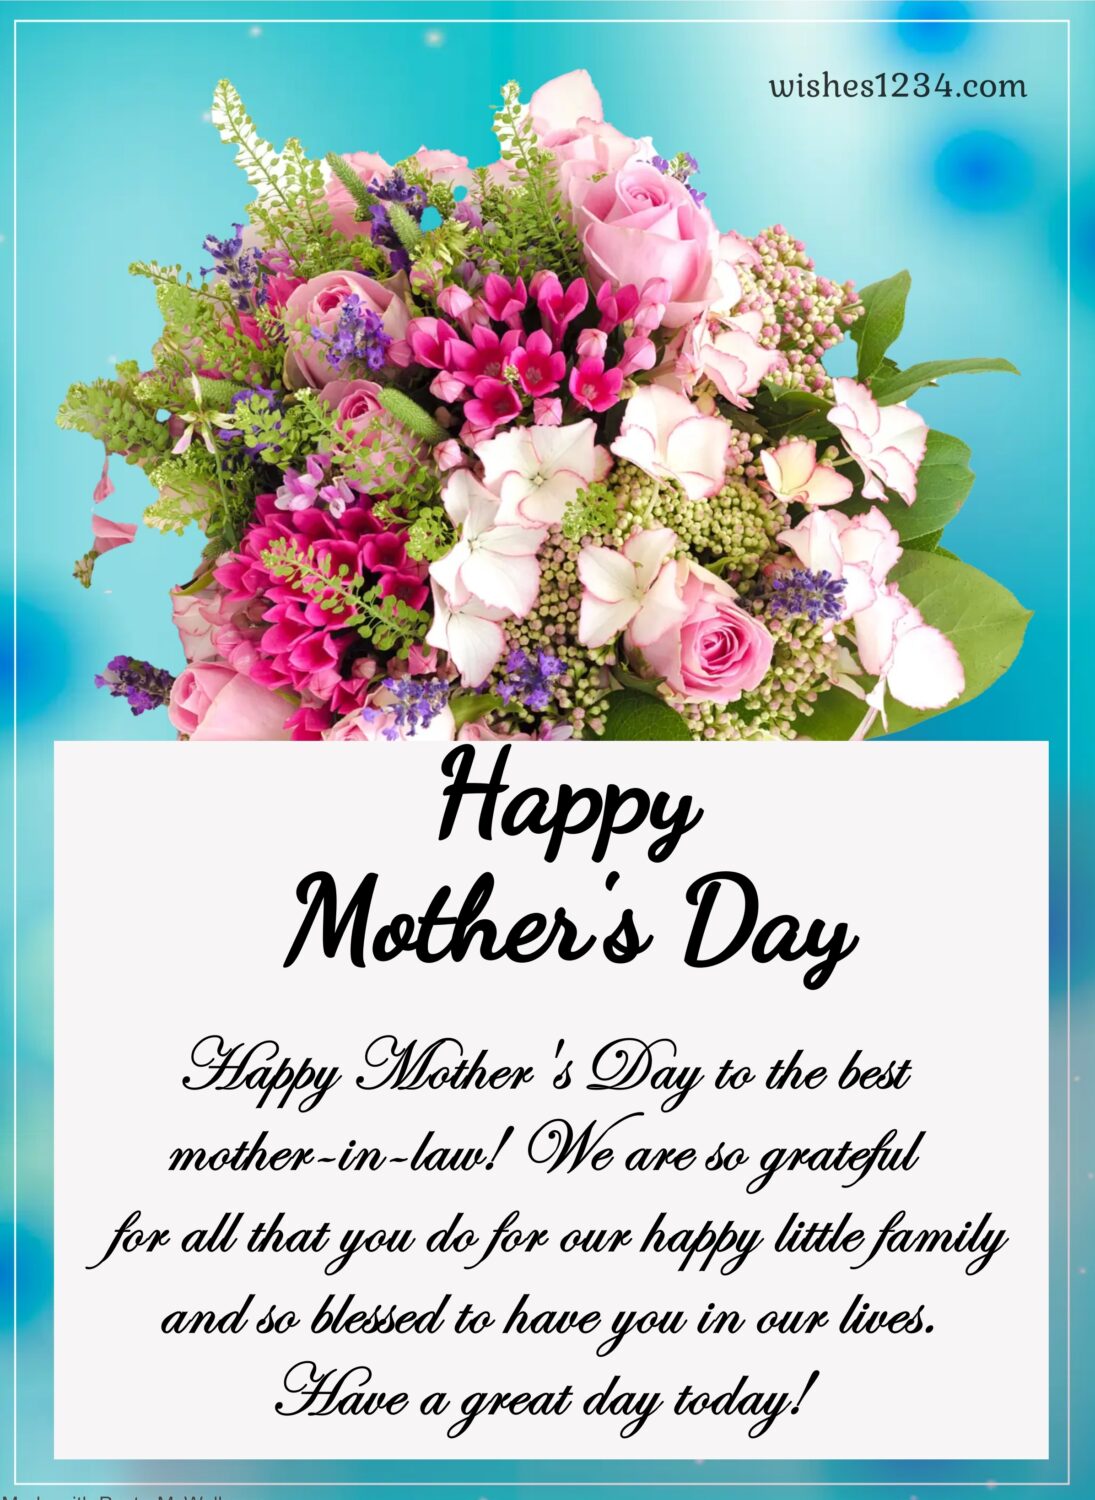 Flower bouquet with mothrs day message, Mothers day quotes.